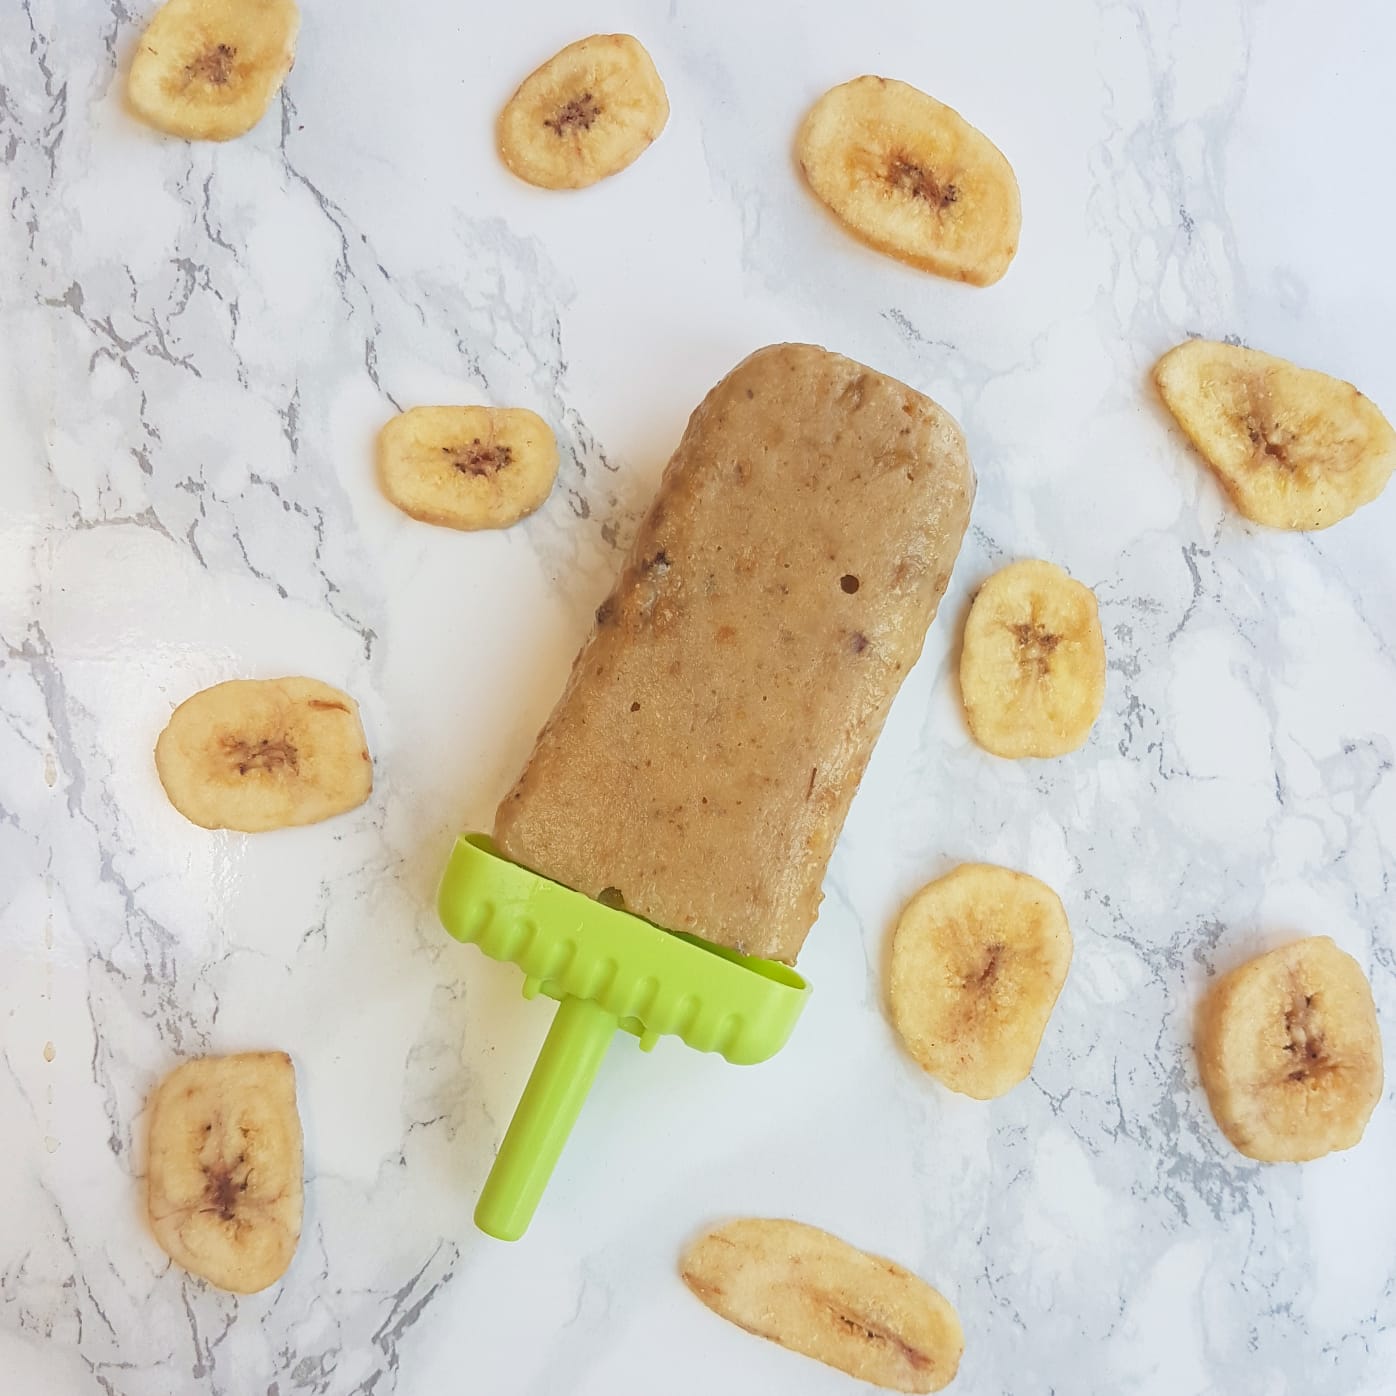 Banana and Peanut Butter Ice Lollies